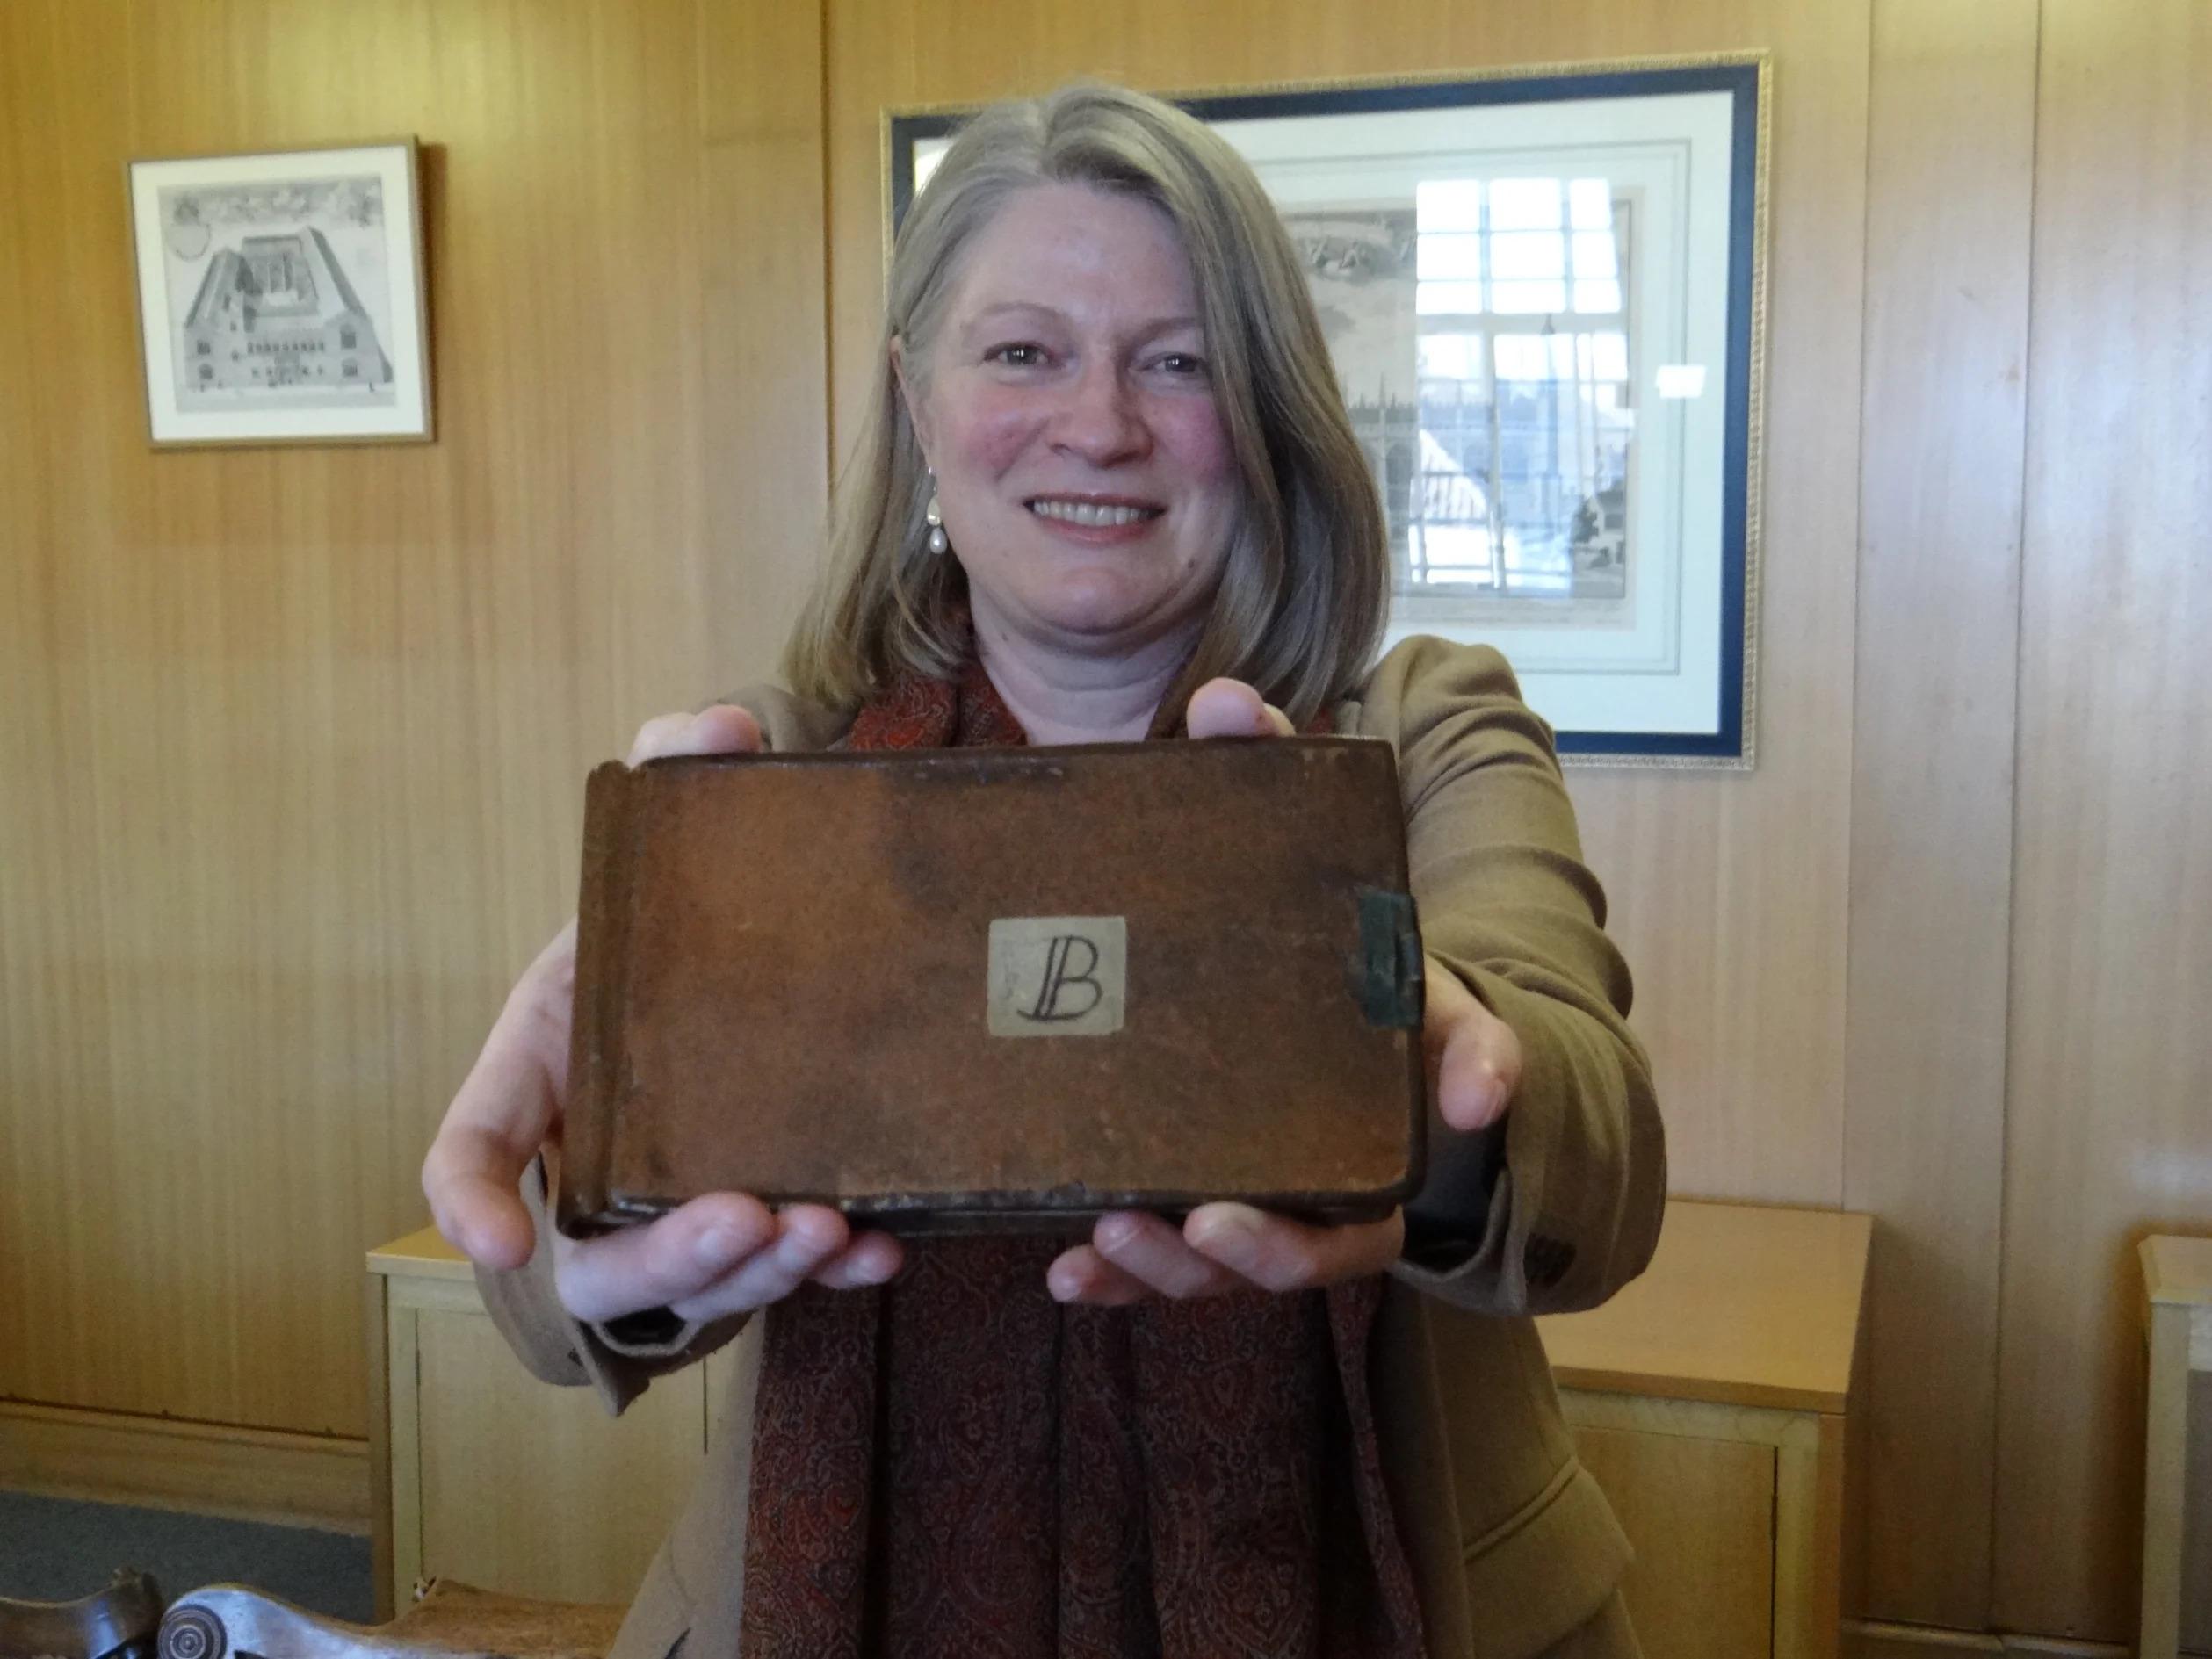 Jessica Gardner with one of the returned notebooks (Source: University of Cambridge/reproduction)